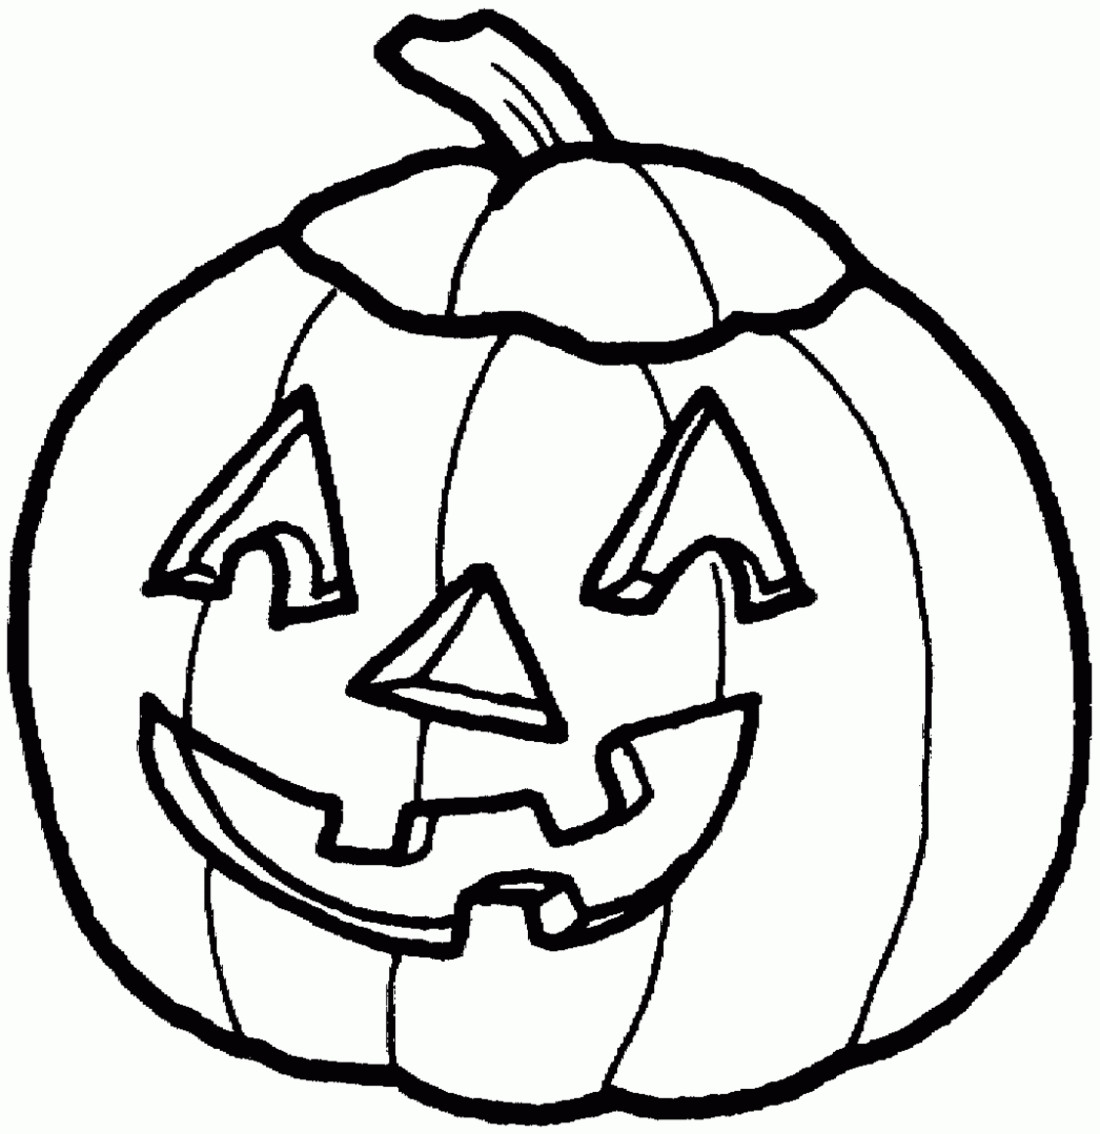 Coloring Pages Of Pumpkins
 Free Printable Pumpkin Coloring Pages For Kids